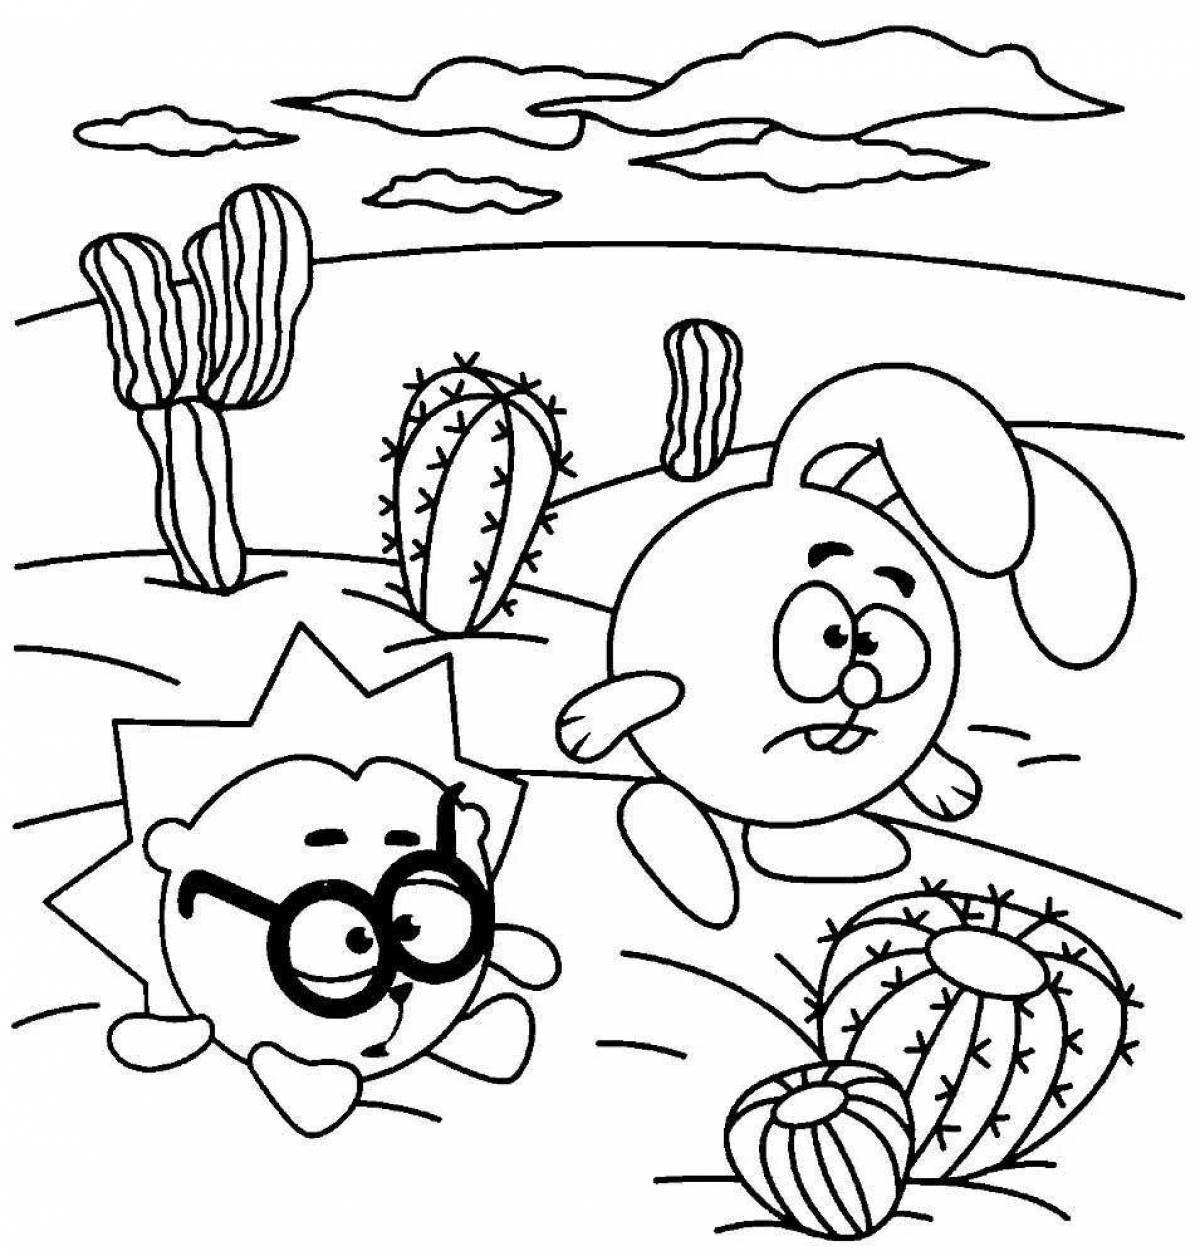 Children's lively print coloring book